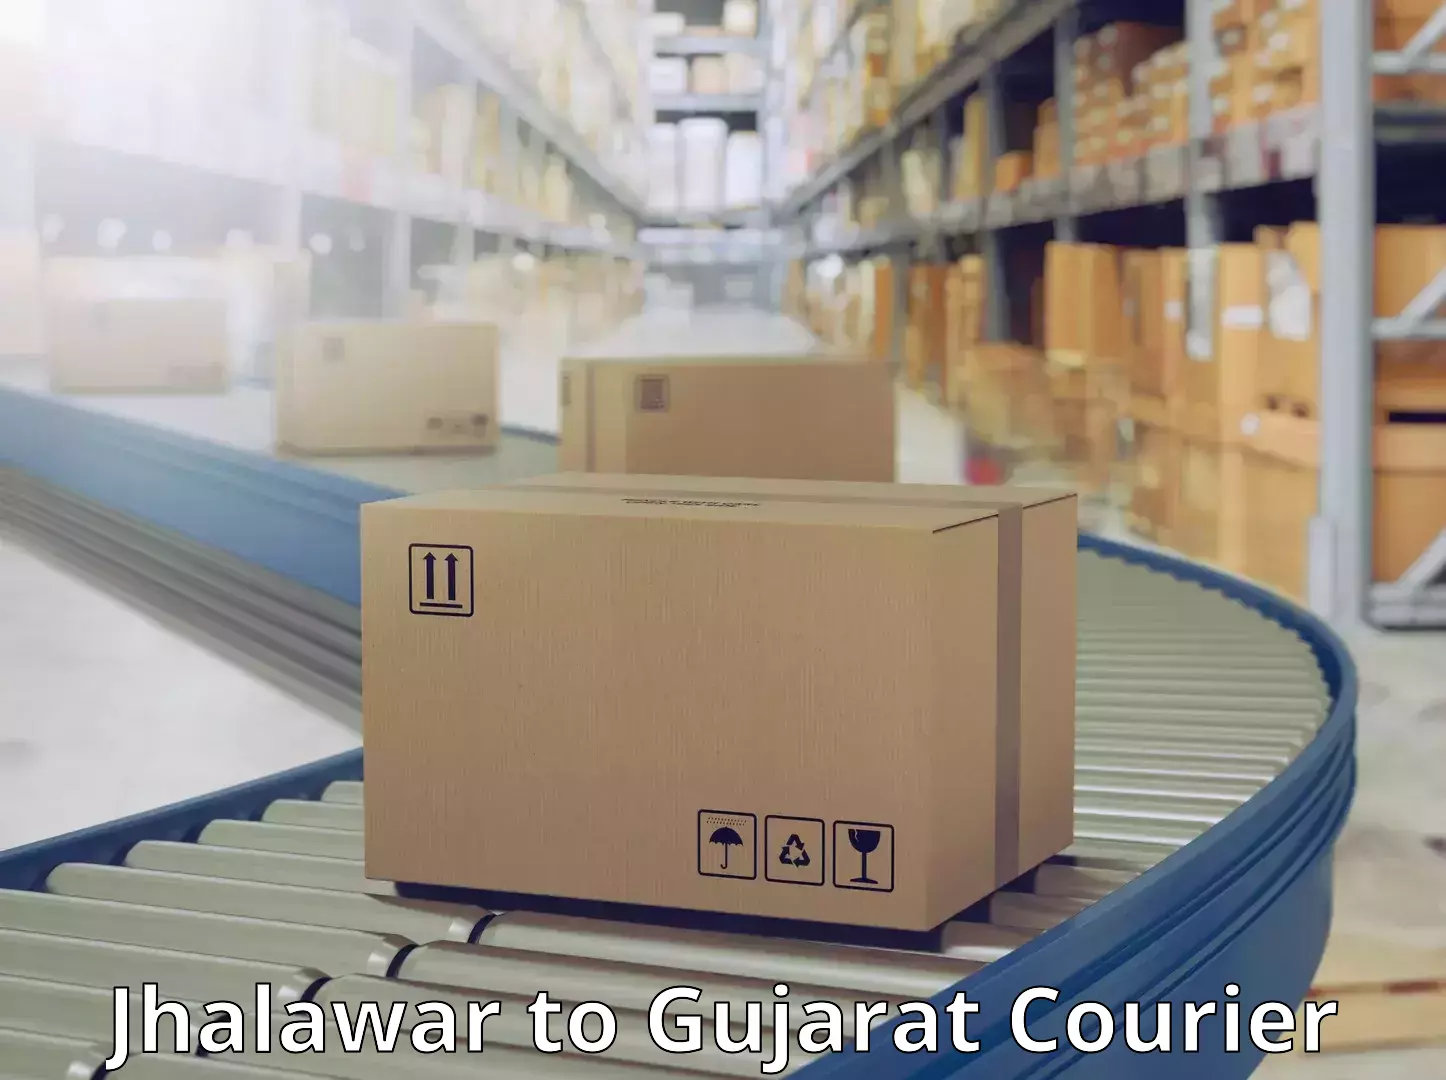 Quality courier services Jhalawar to Ahmedabad